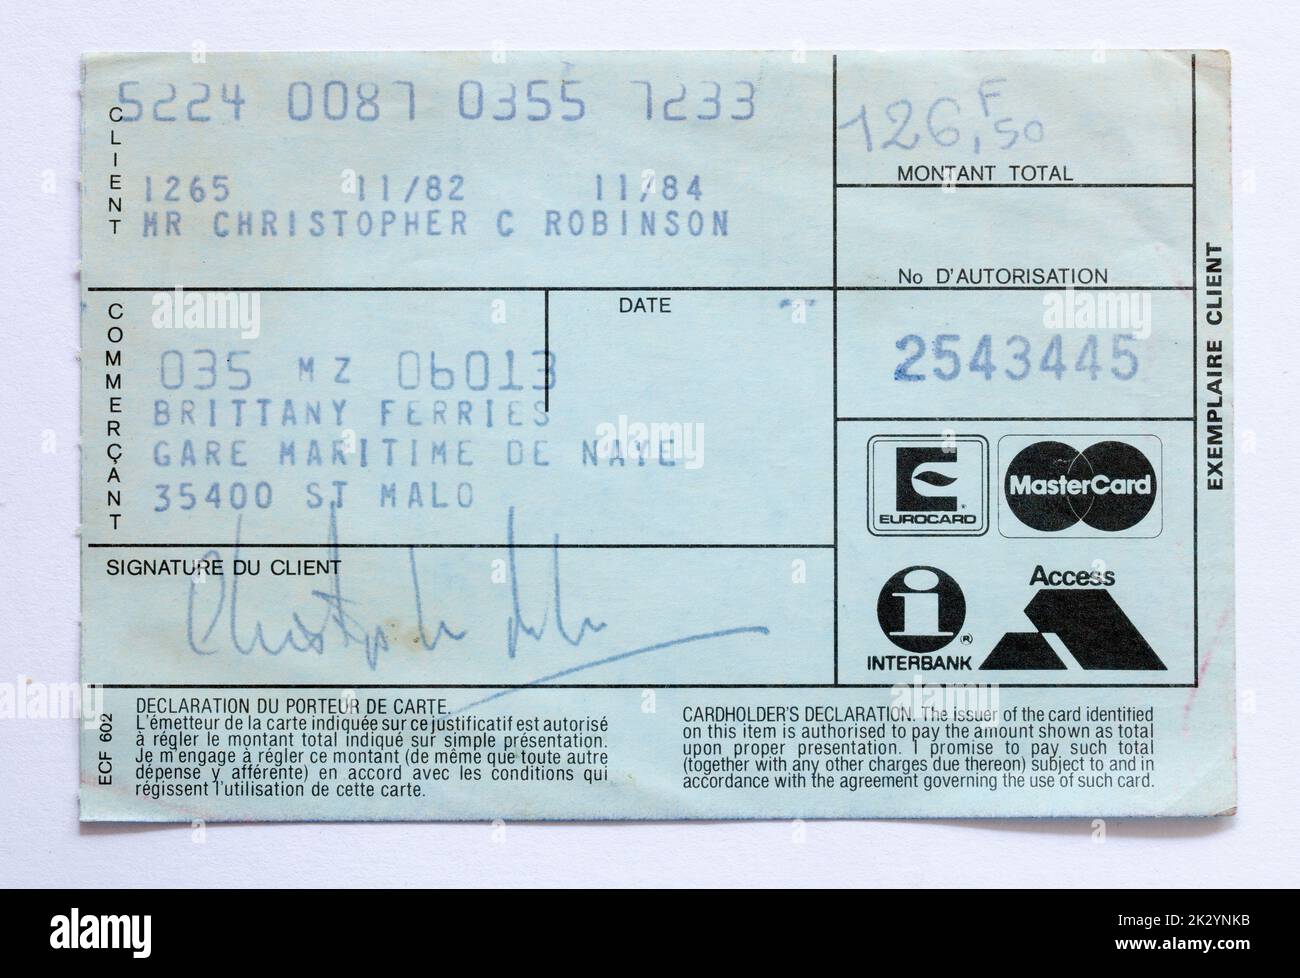 1980s Access Credit Card Receipt for Brittany Ferries Stock Photo